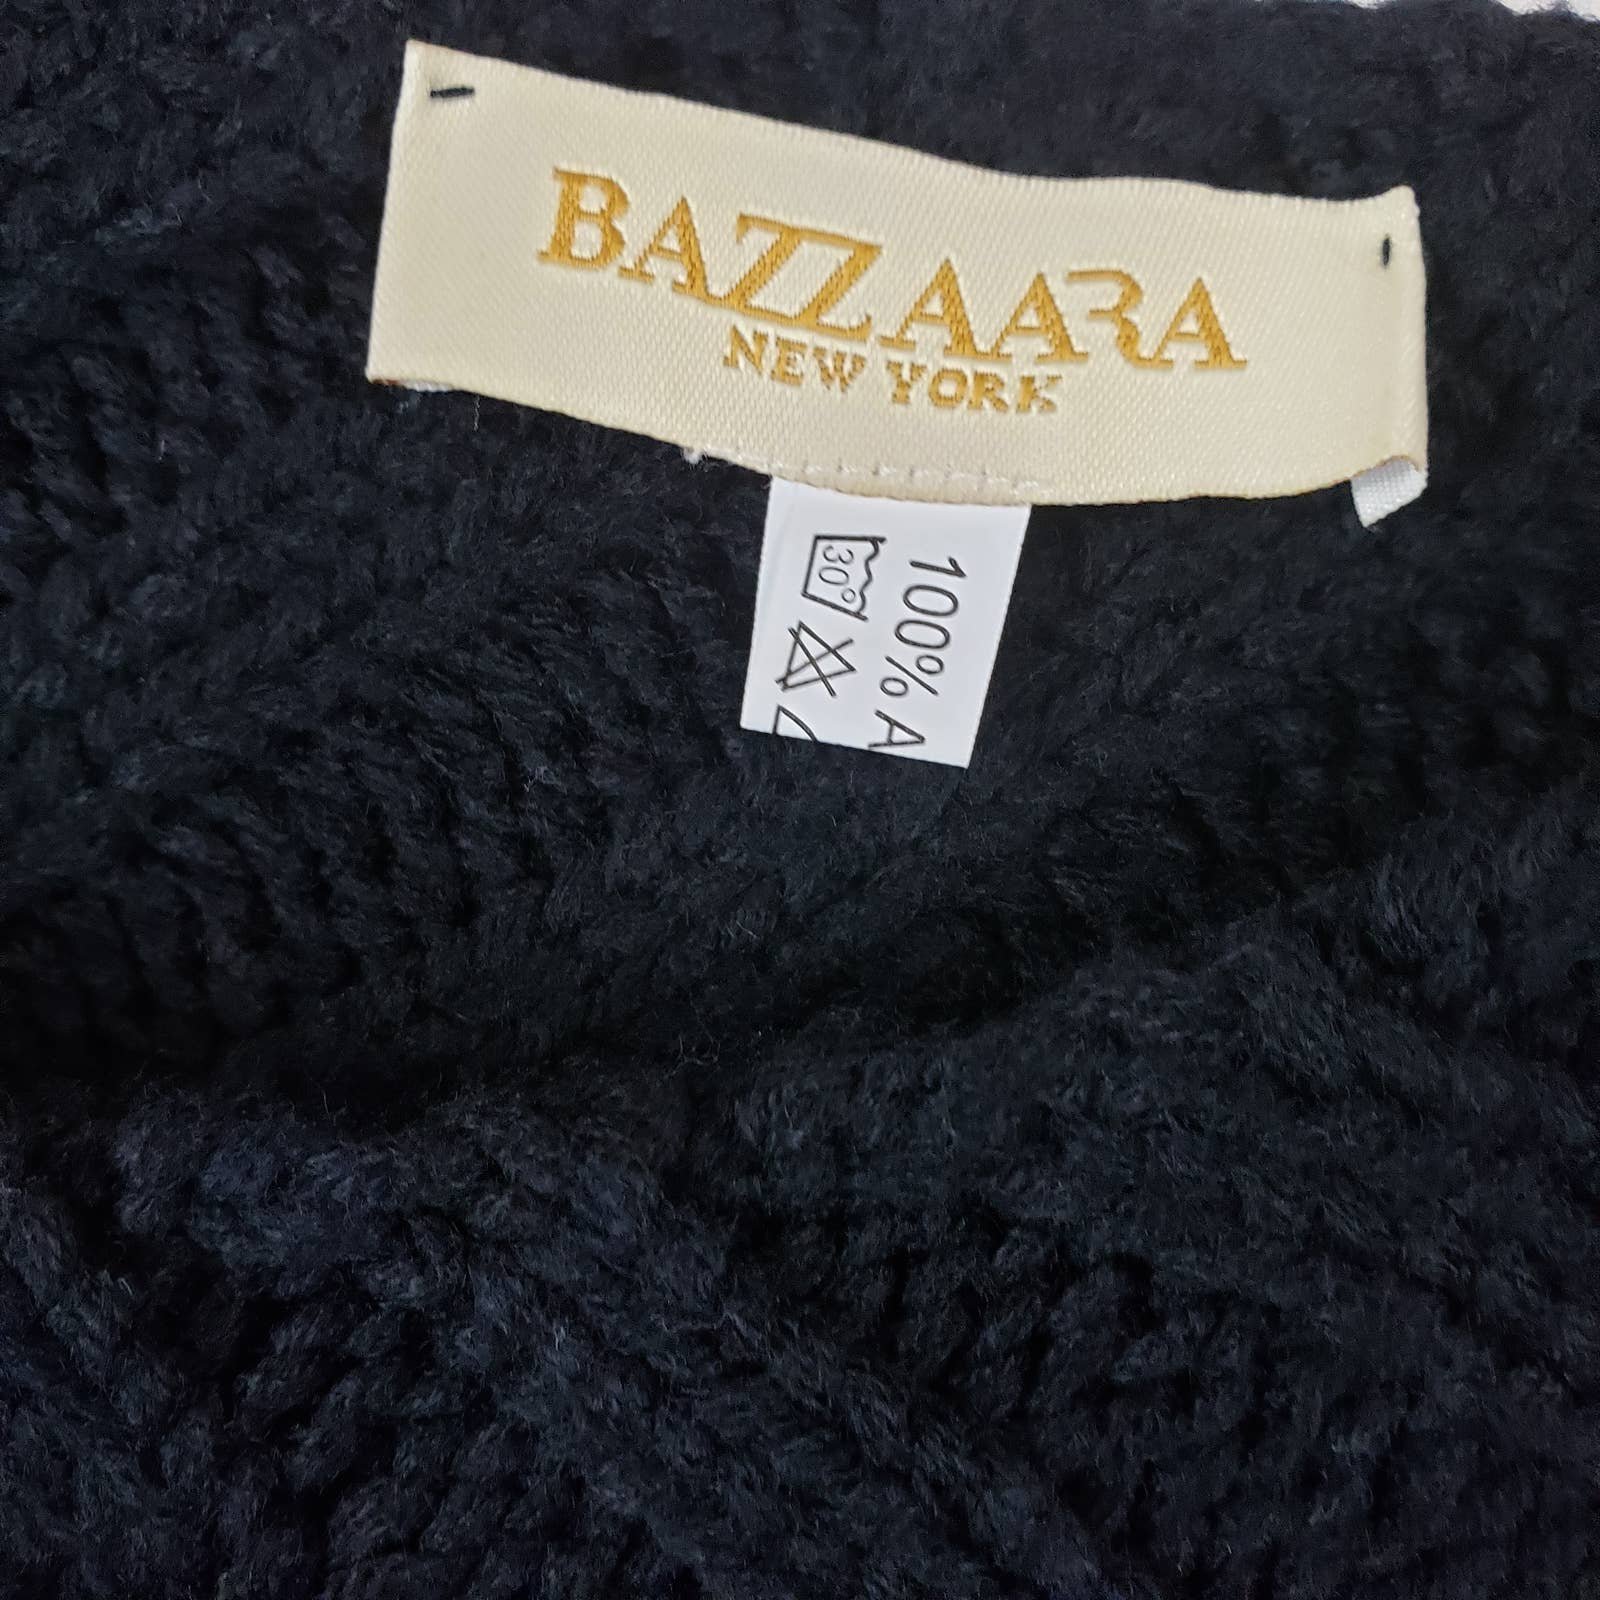 Classic Bazzaara Sweater Cape Womens One Size Cable Knit Black LTS0OER0H just for you